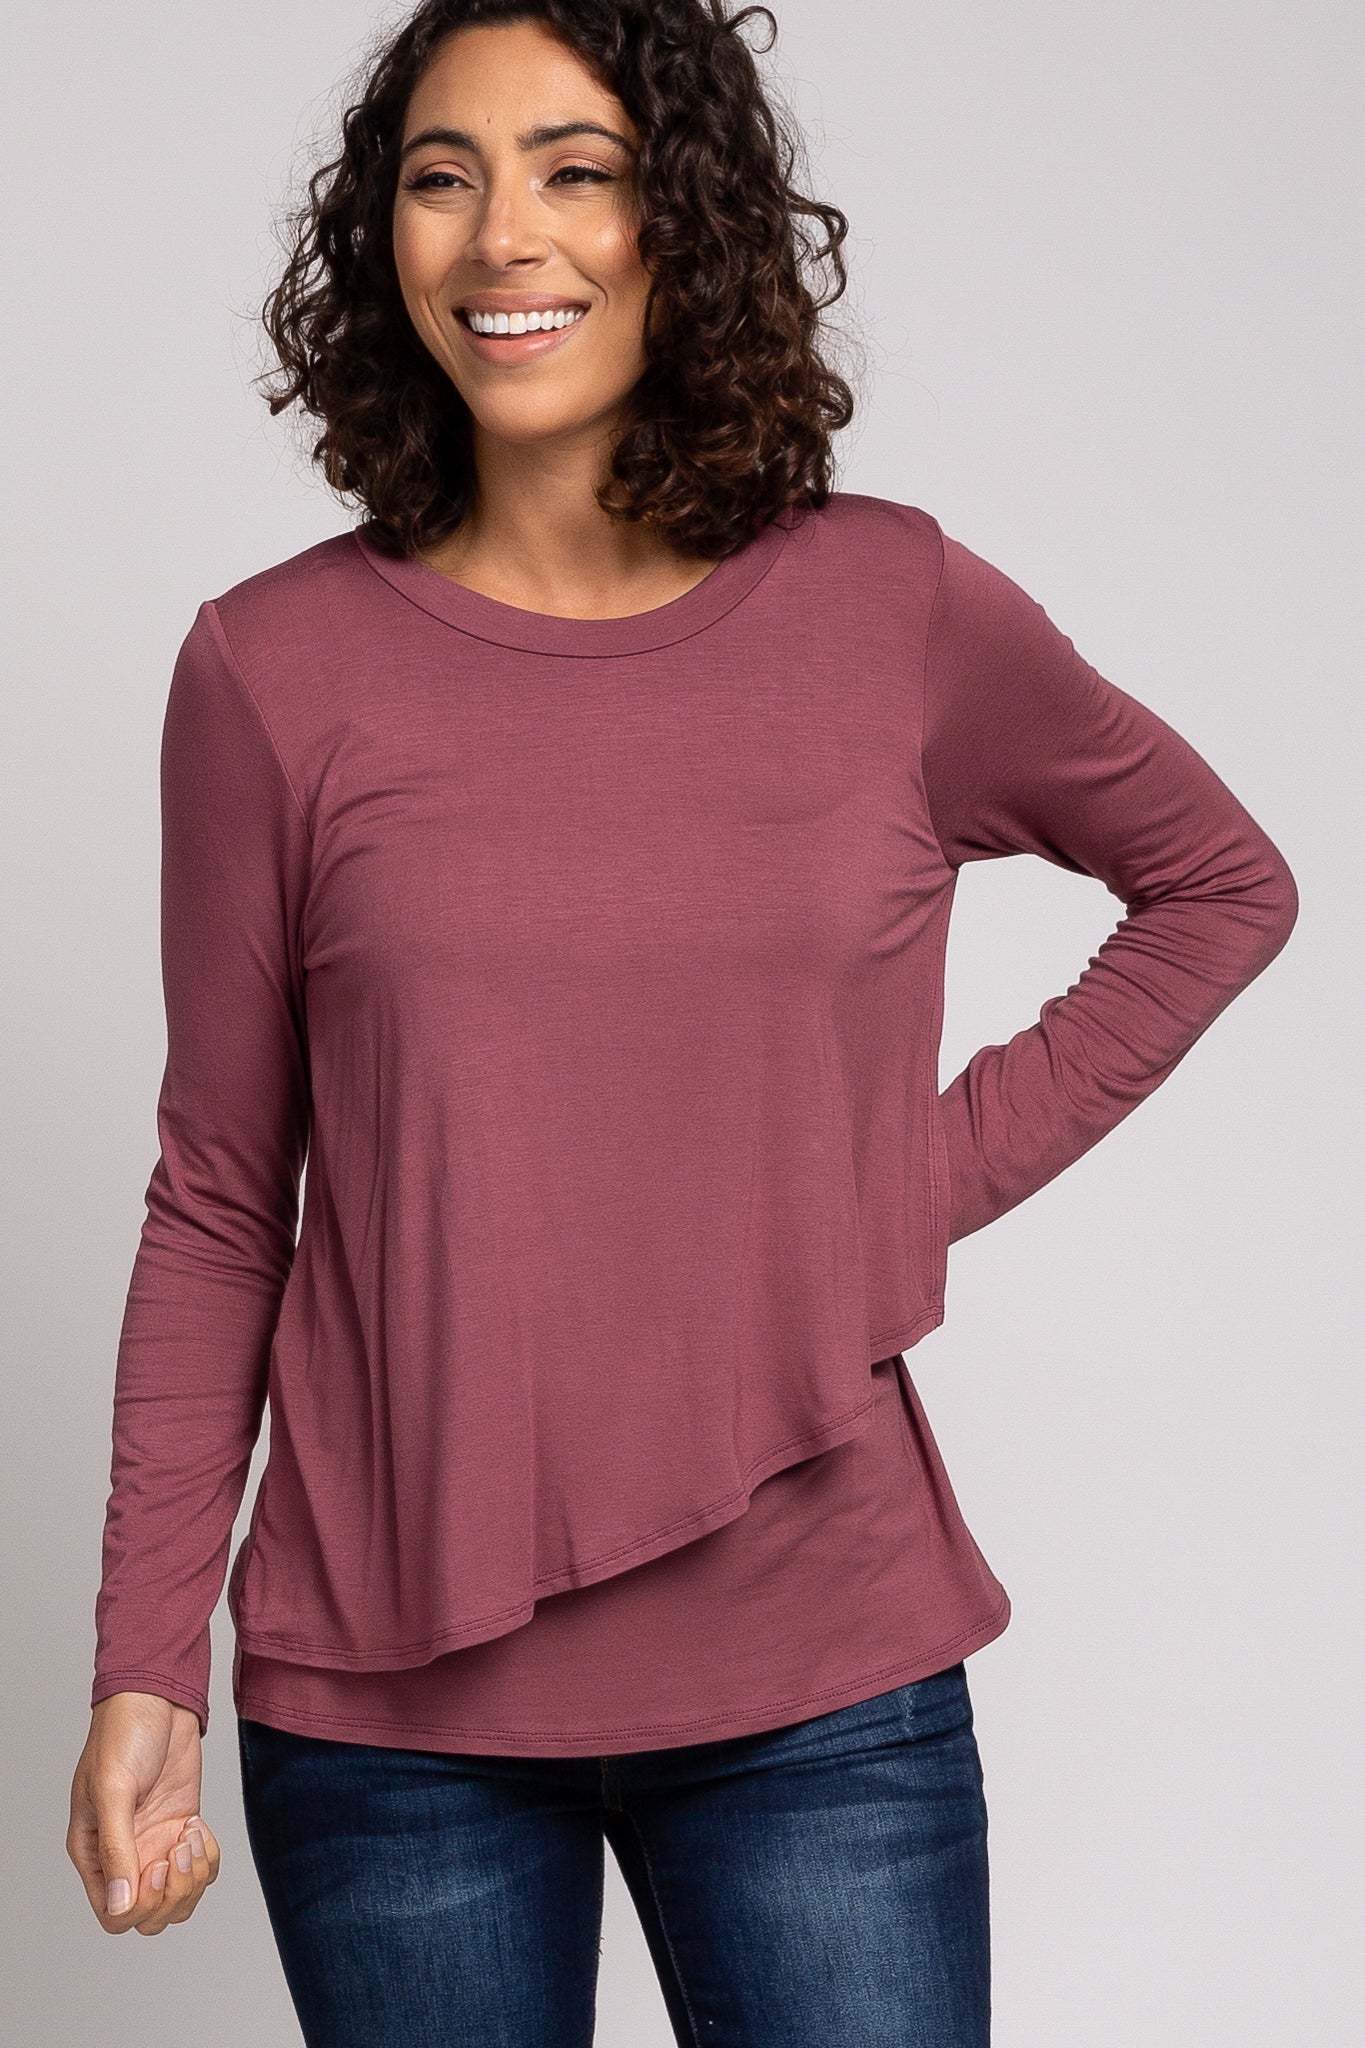 PinkBlush Mauve Solid Layered Front Long Sleeve Nursing Top